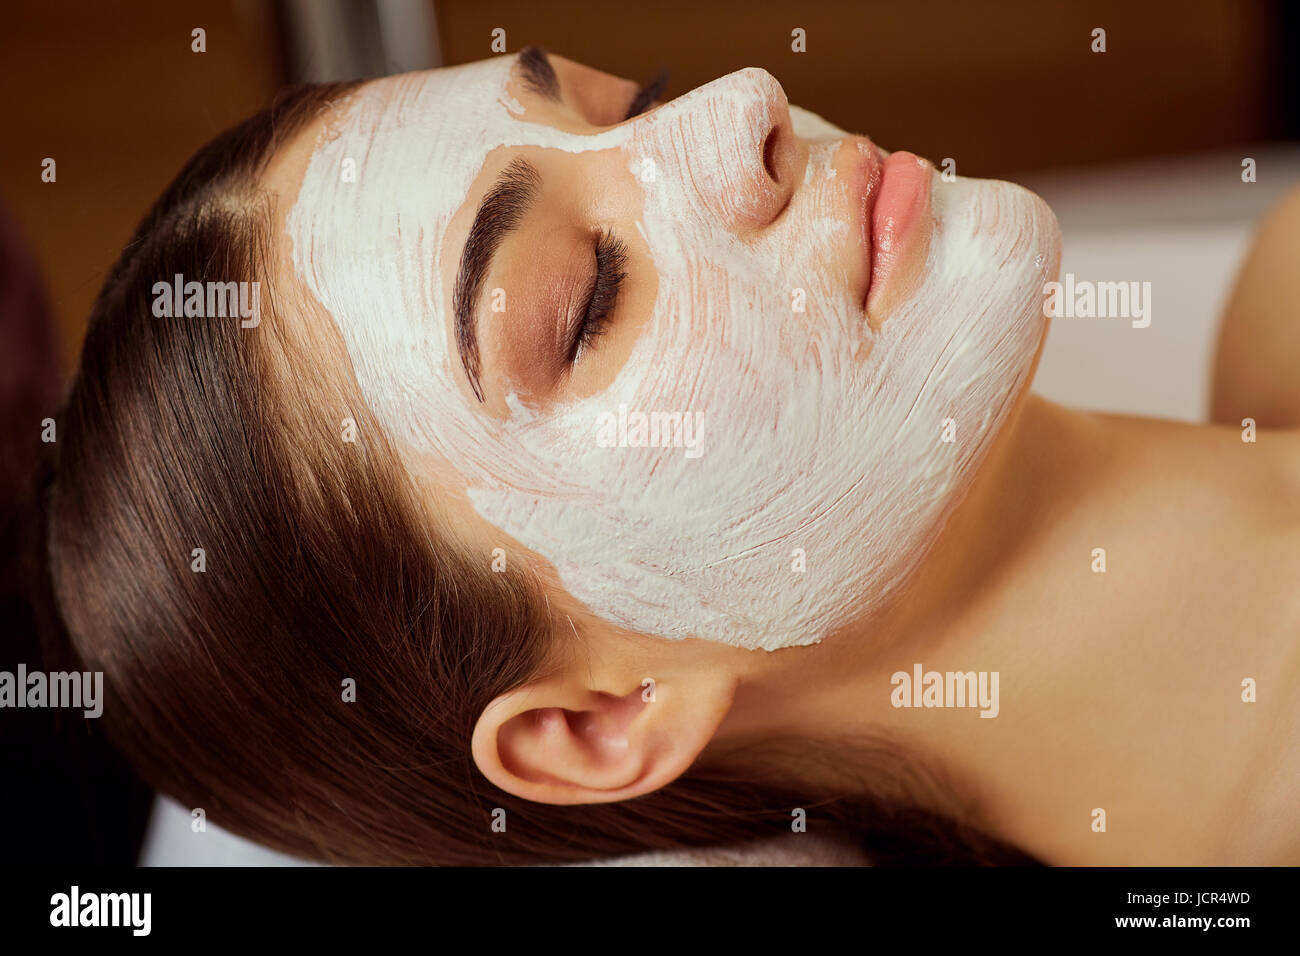 Close-up of young woman with face mask on face Banque D'Images